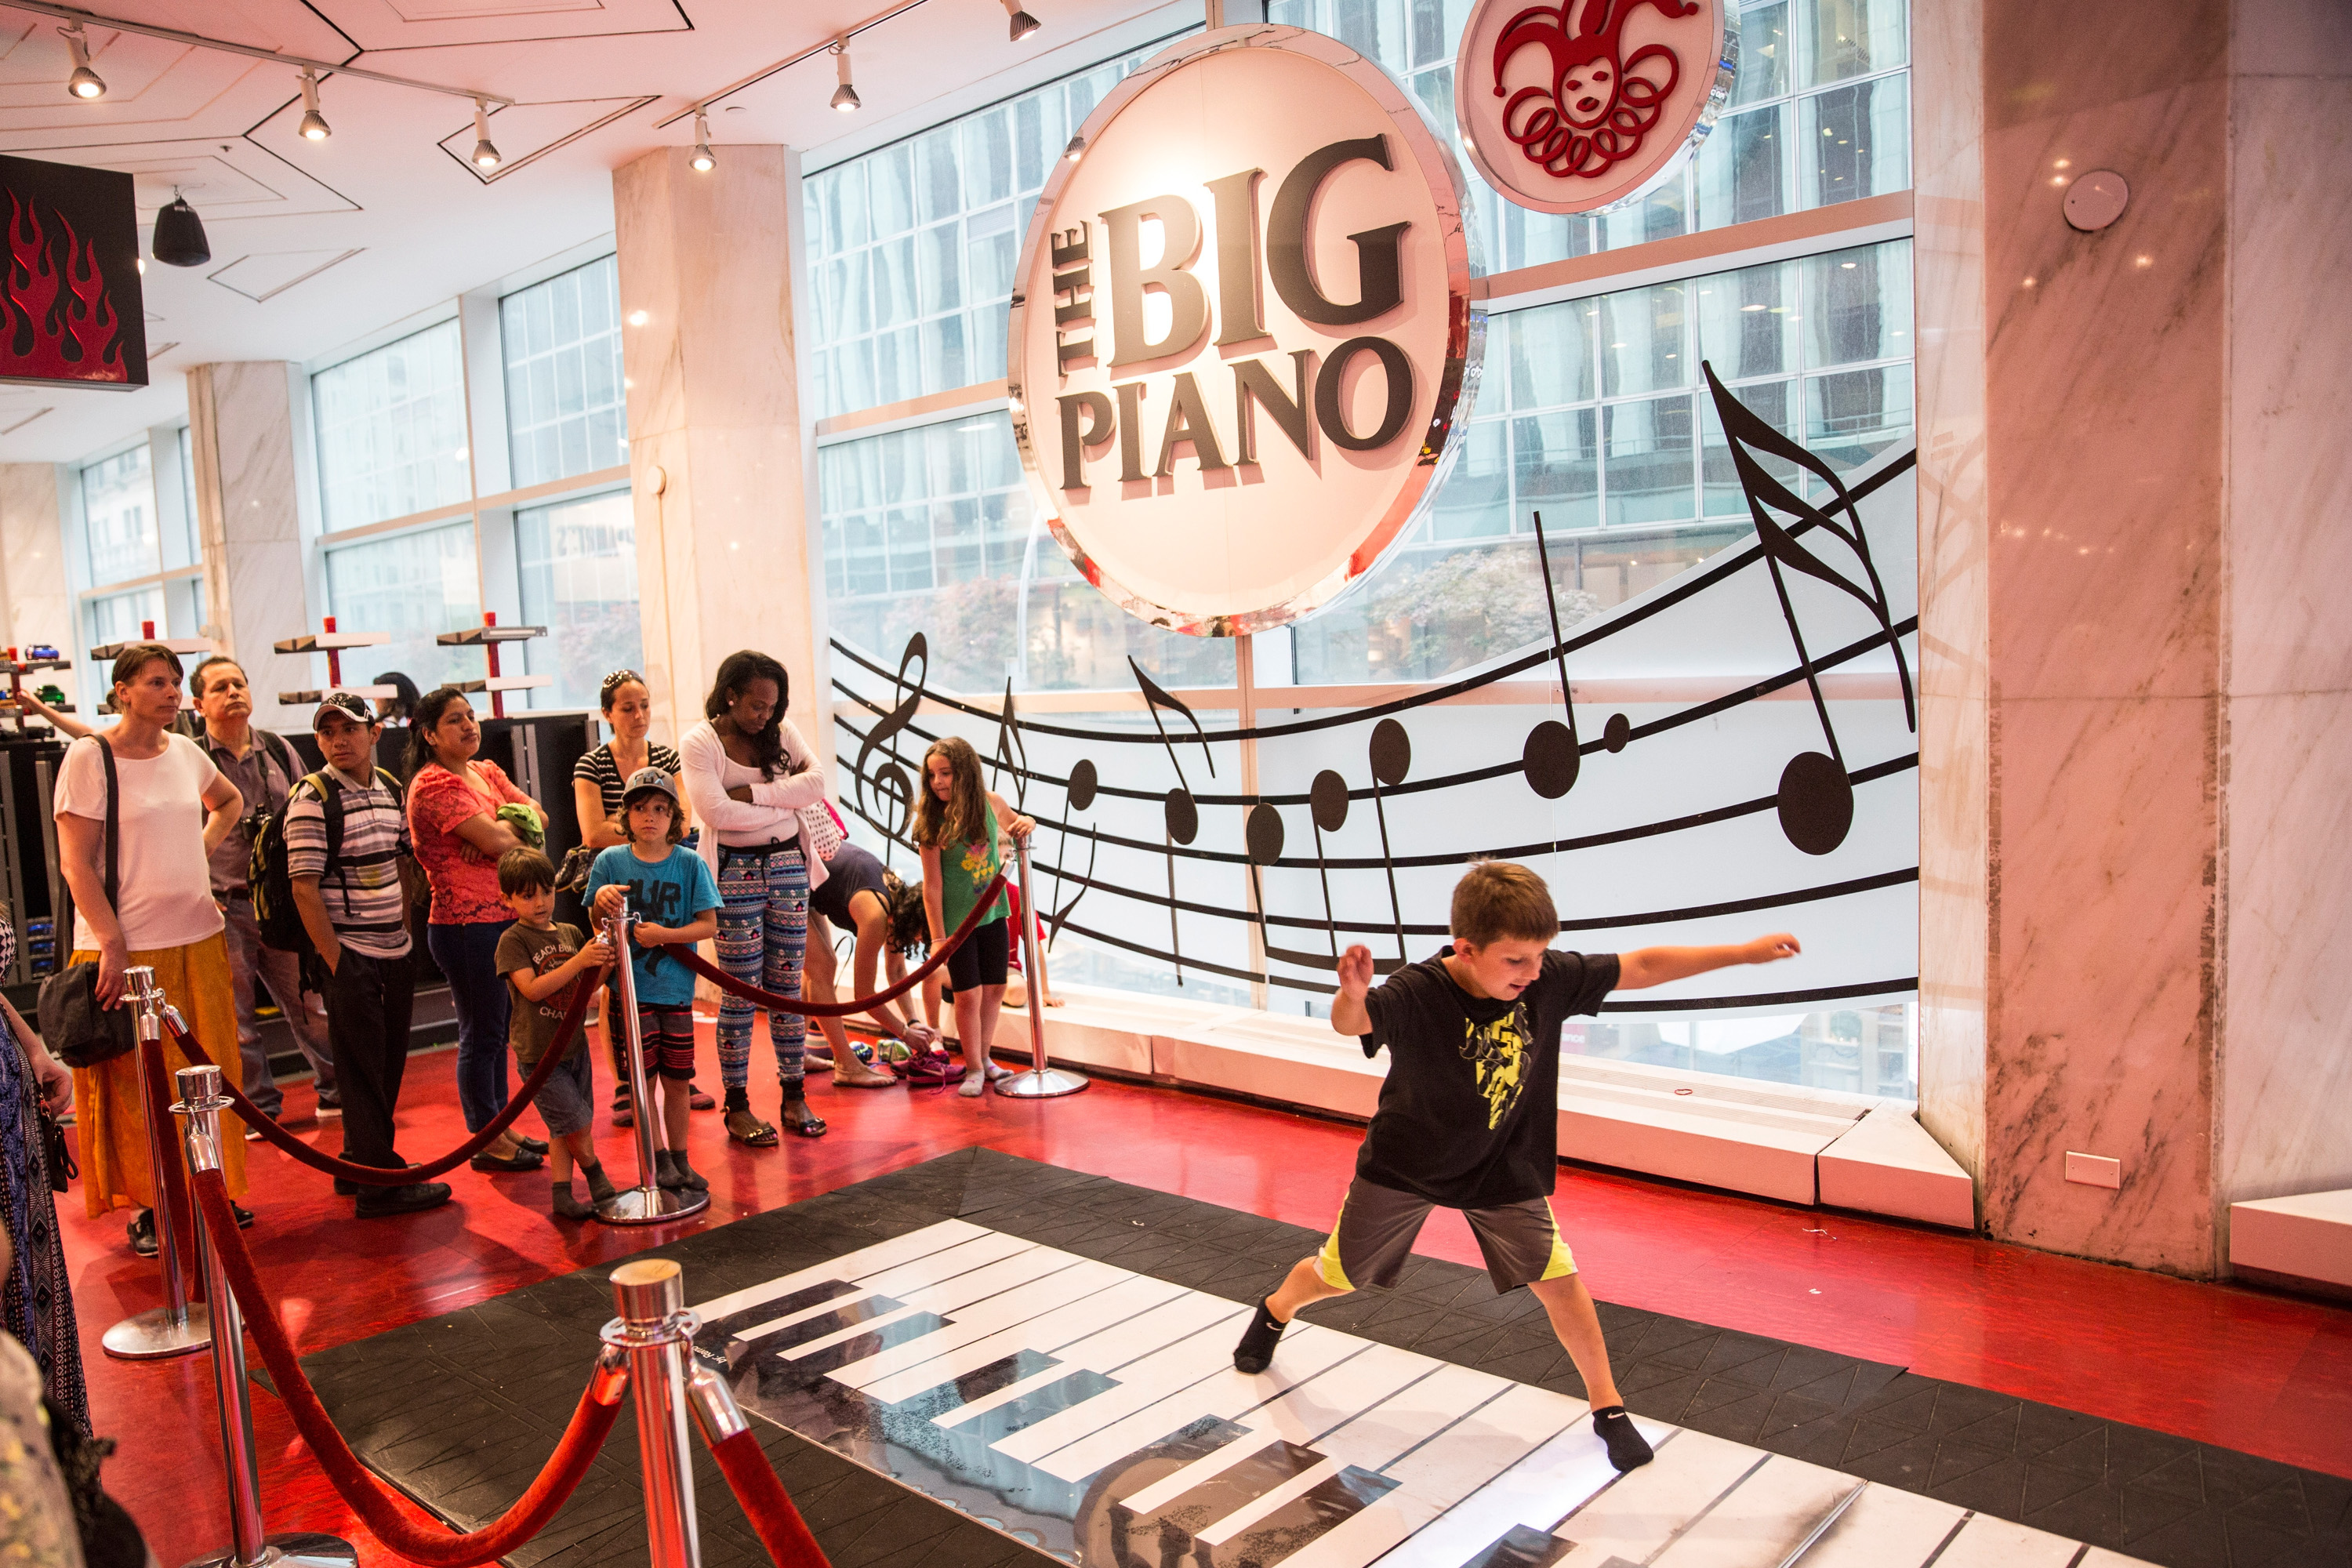 Children play on the "Big Piano," made famous by the movie Big, in FAO Schwarz toy store on July 14, 2015 in New York City. (Andrew Burton&mdash;Getty Images)